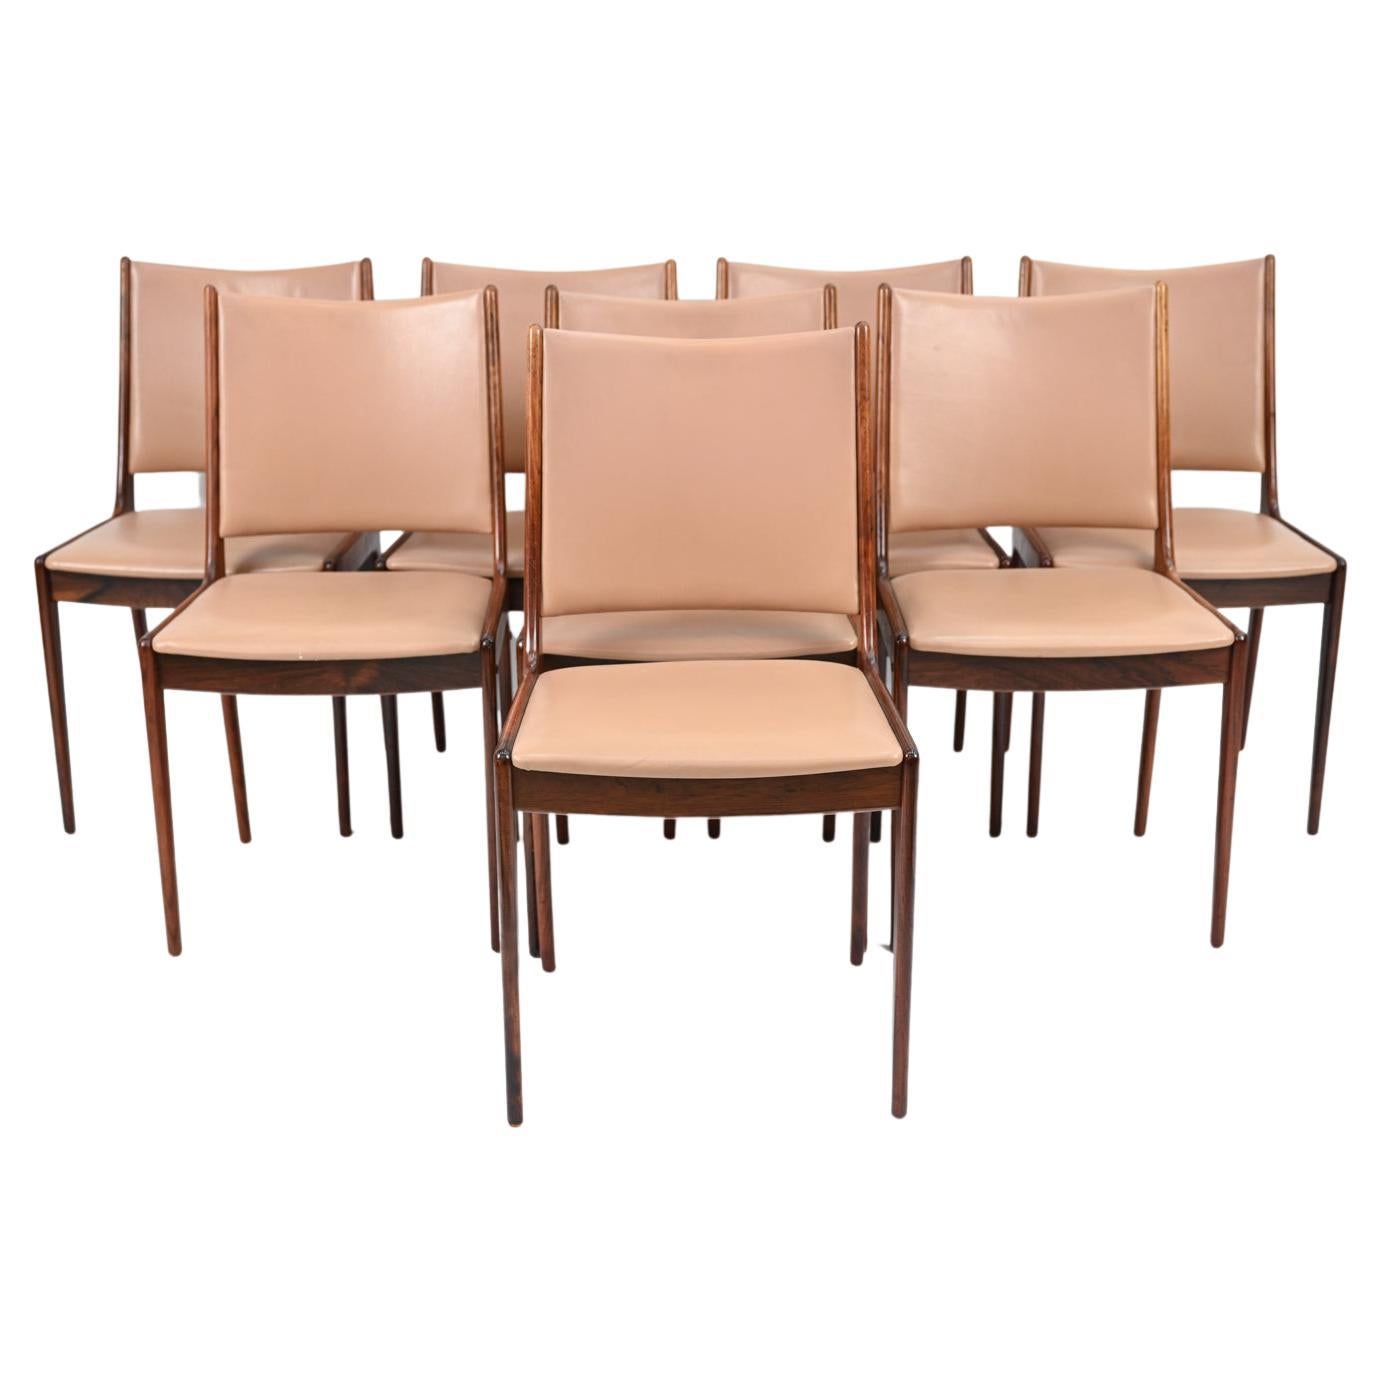 '8' Johannes Andersen for Uldum Rosewood Dining Chairs